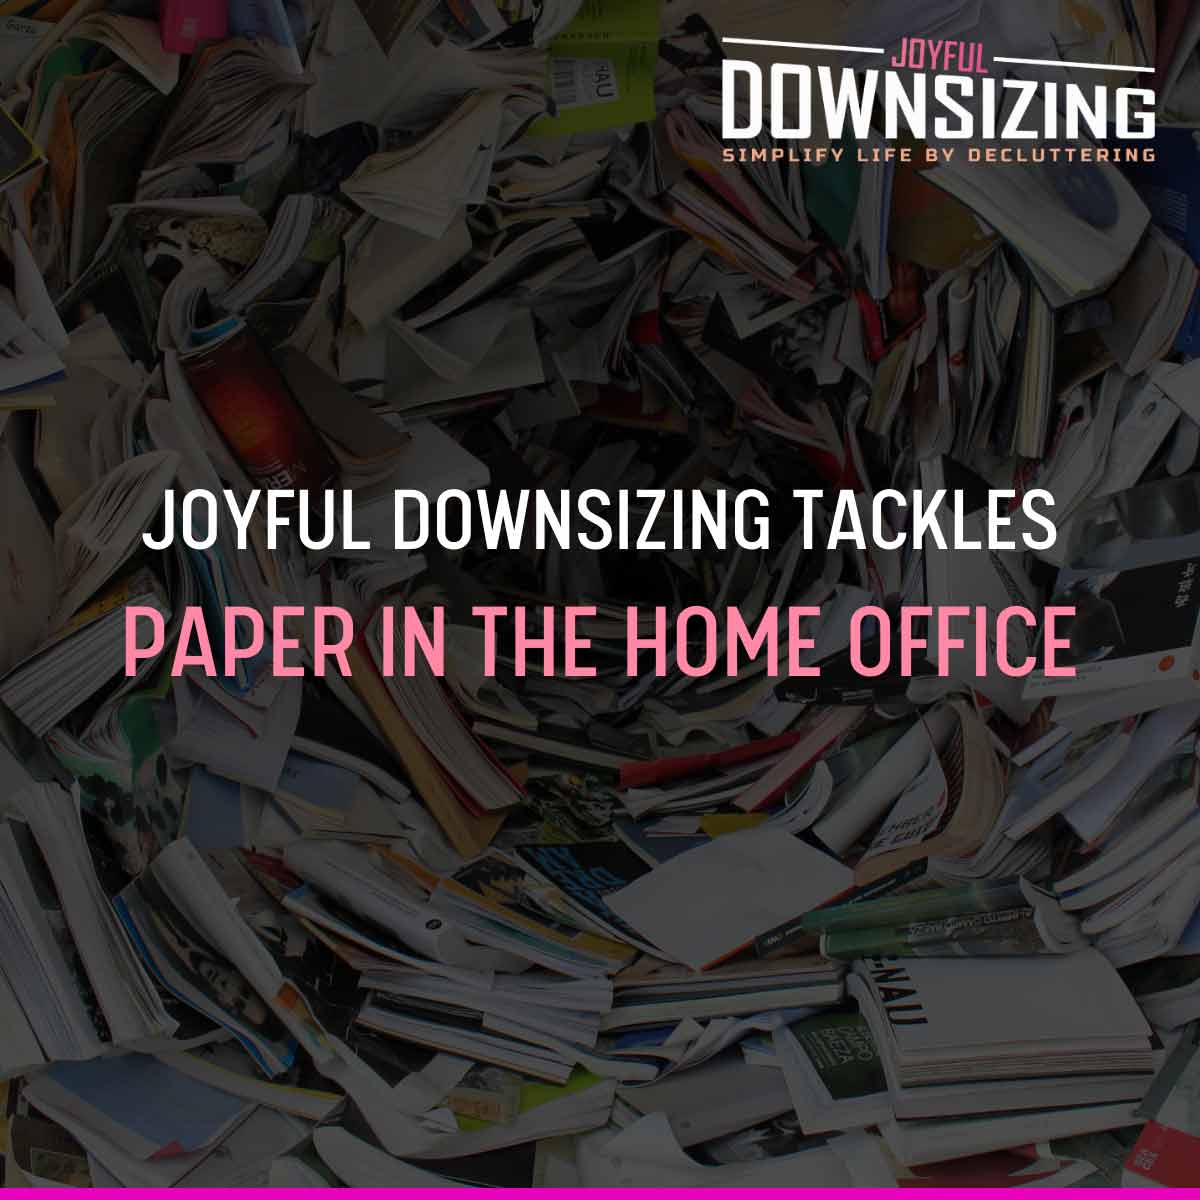 Joyful Downsizing Tackles Paper in the Home Office featured image